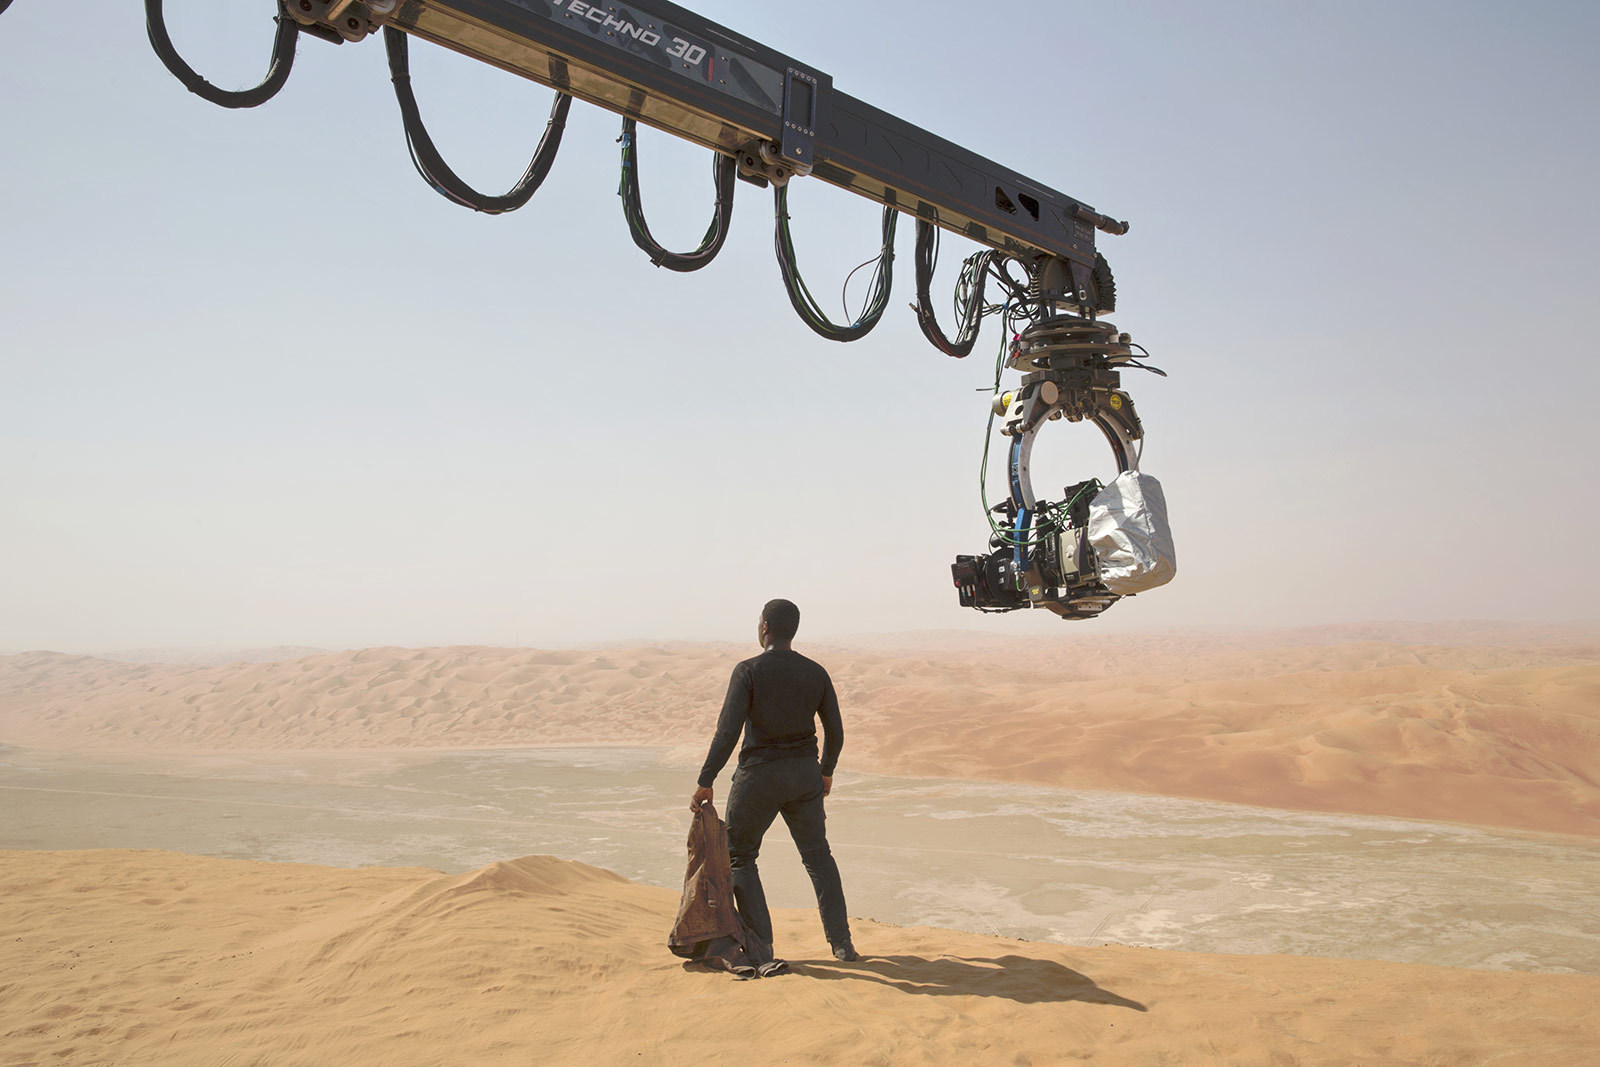 From the Film Star Wars: The Force Awakens (2015) Behind the Scenes